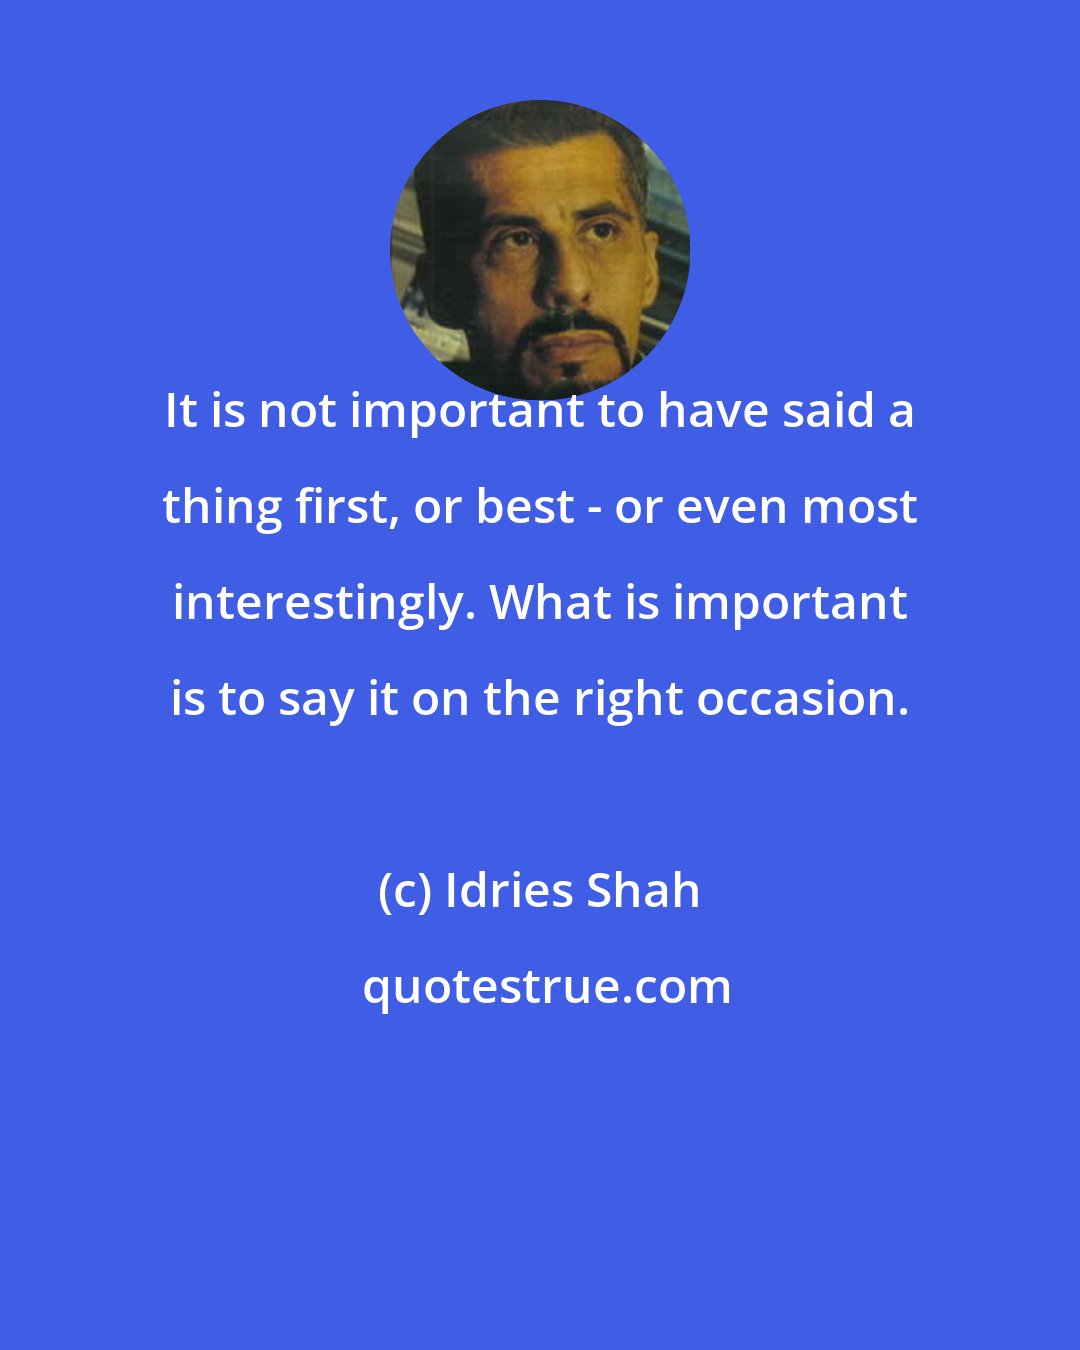 Idries Shah: It is not important to have said a thing first, or best - or even most interestingly. What is important is to say it on the right occasion.